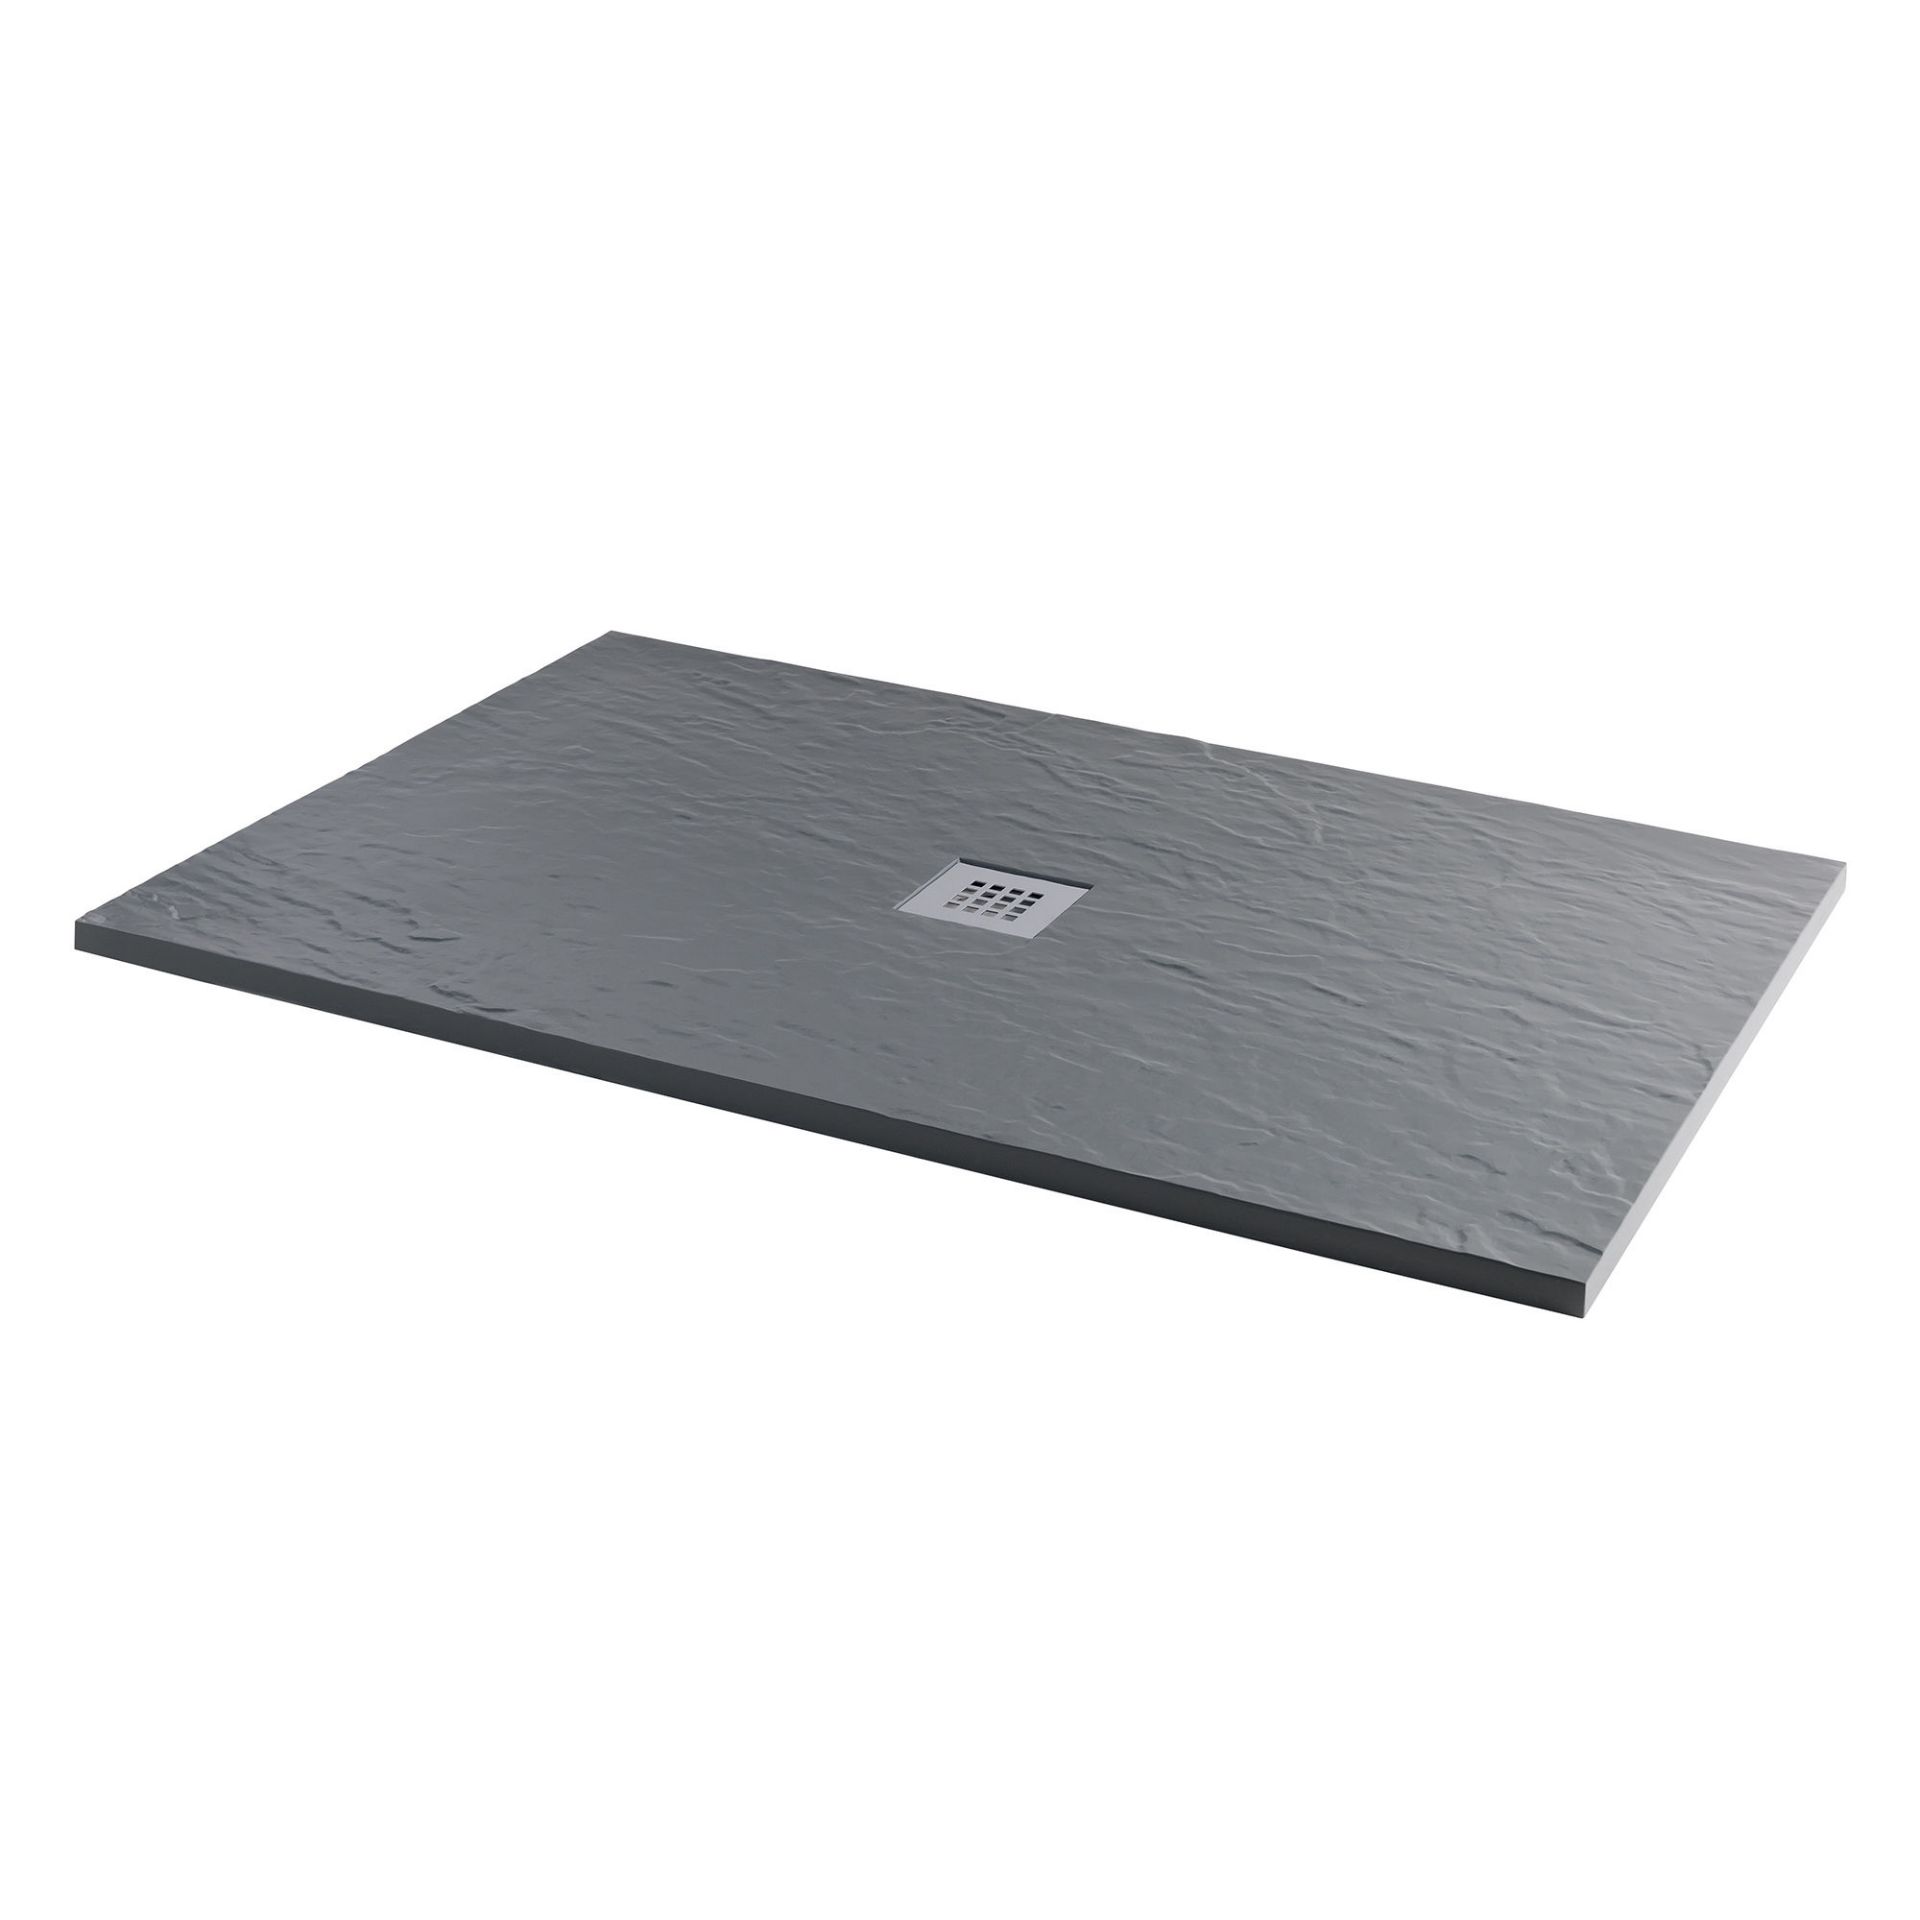 New 1200x900mm Rectangular Slate Effect Shower Tray In Grey. Manufactured In The Uk From High G... - Image 2 of 3